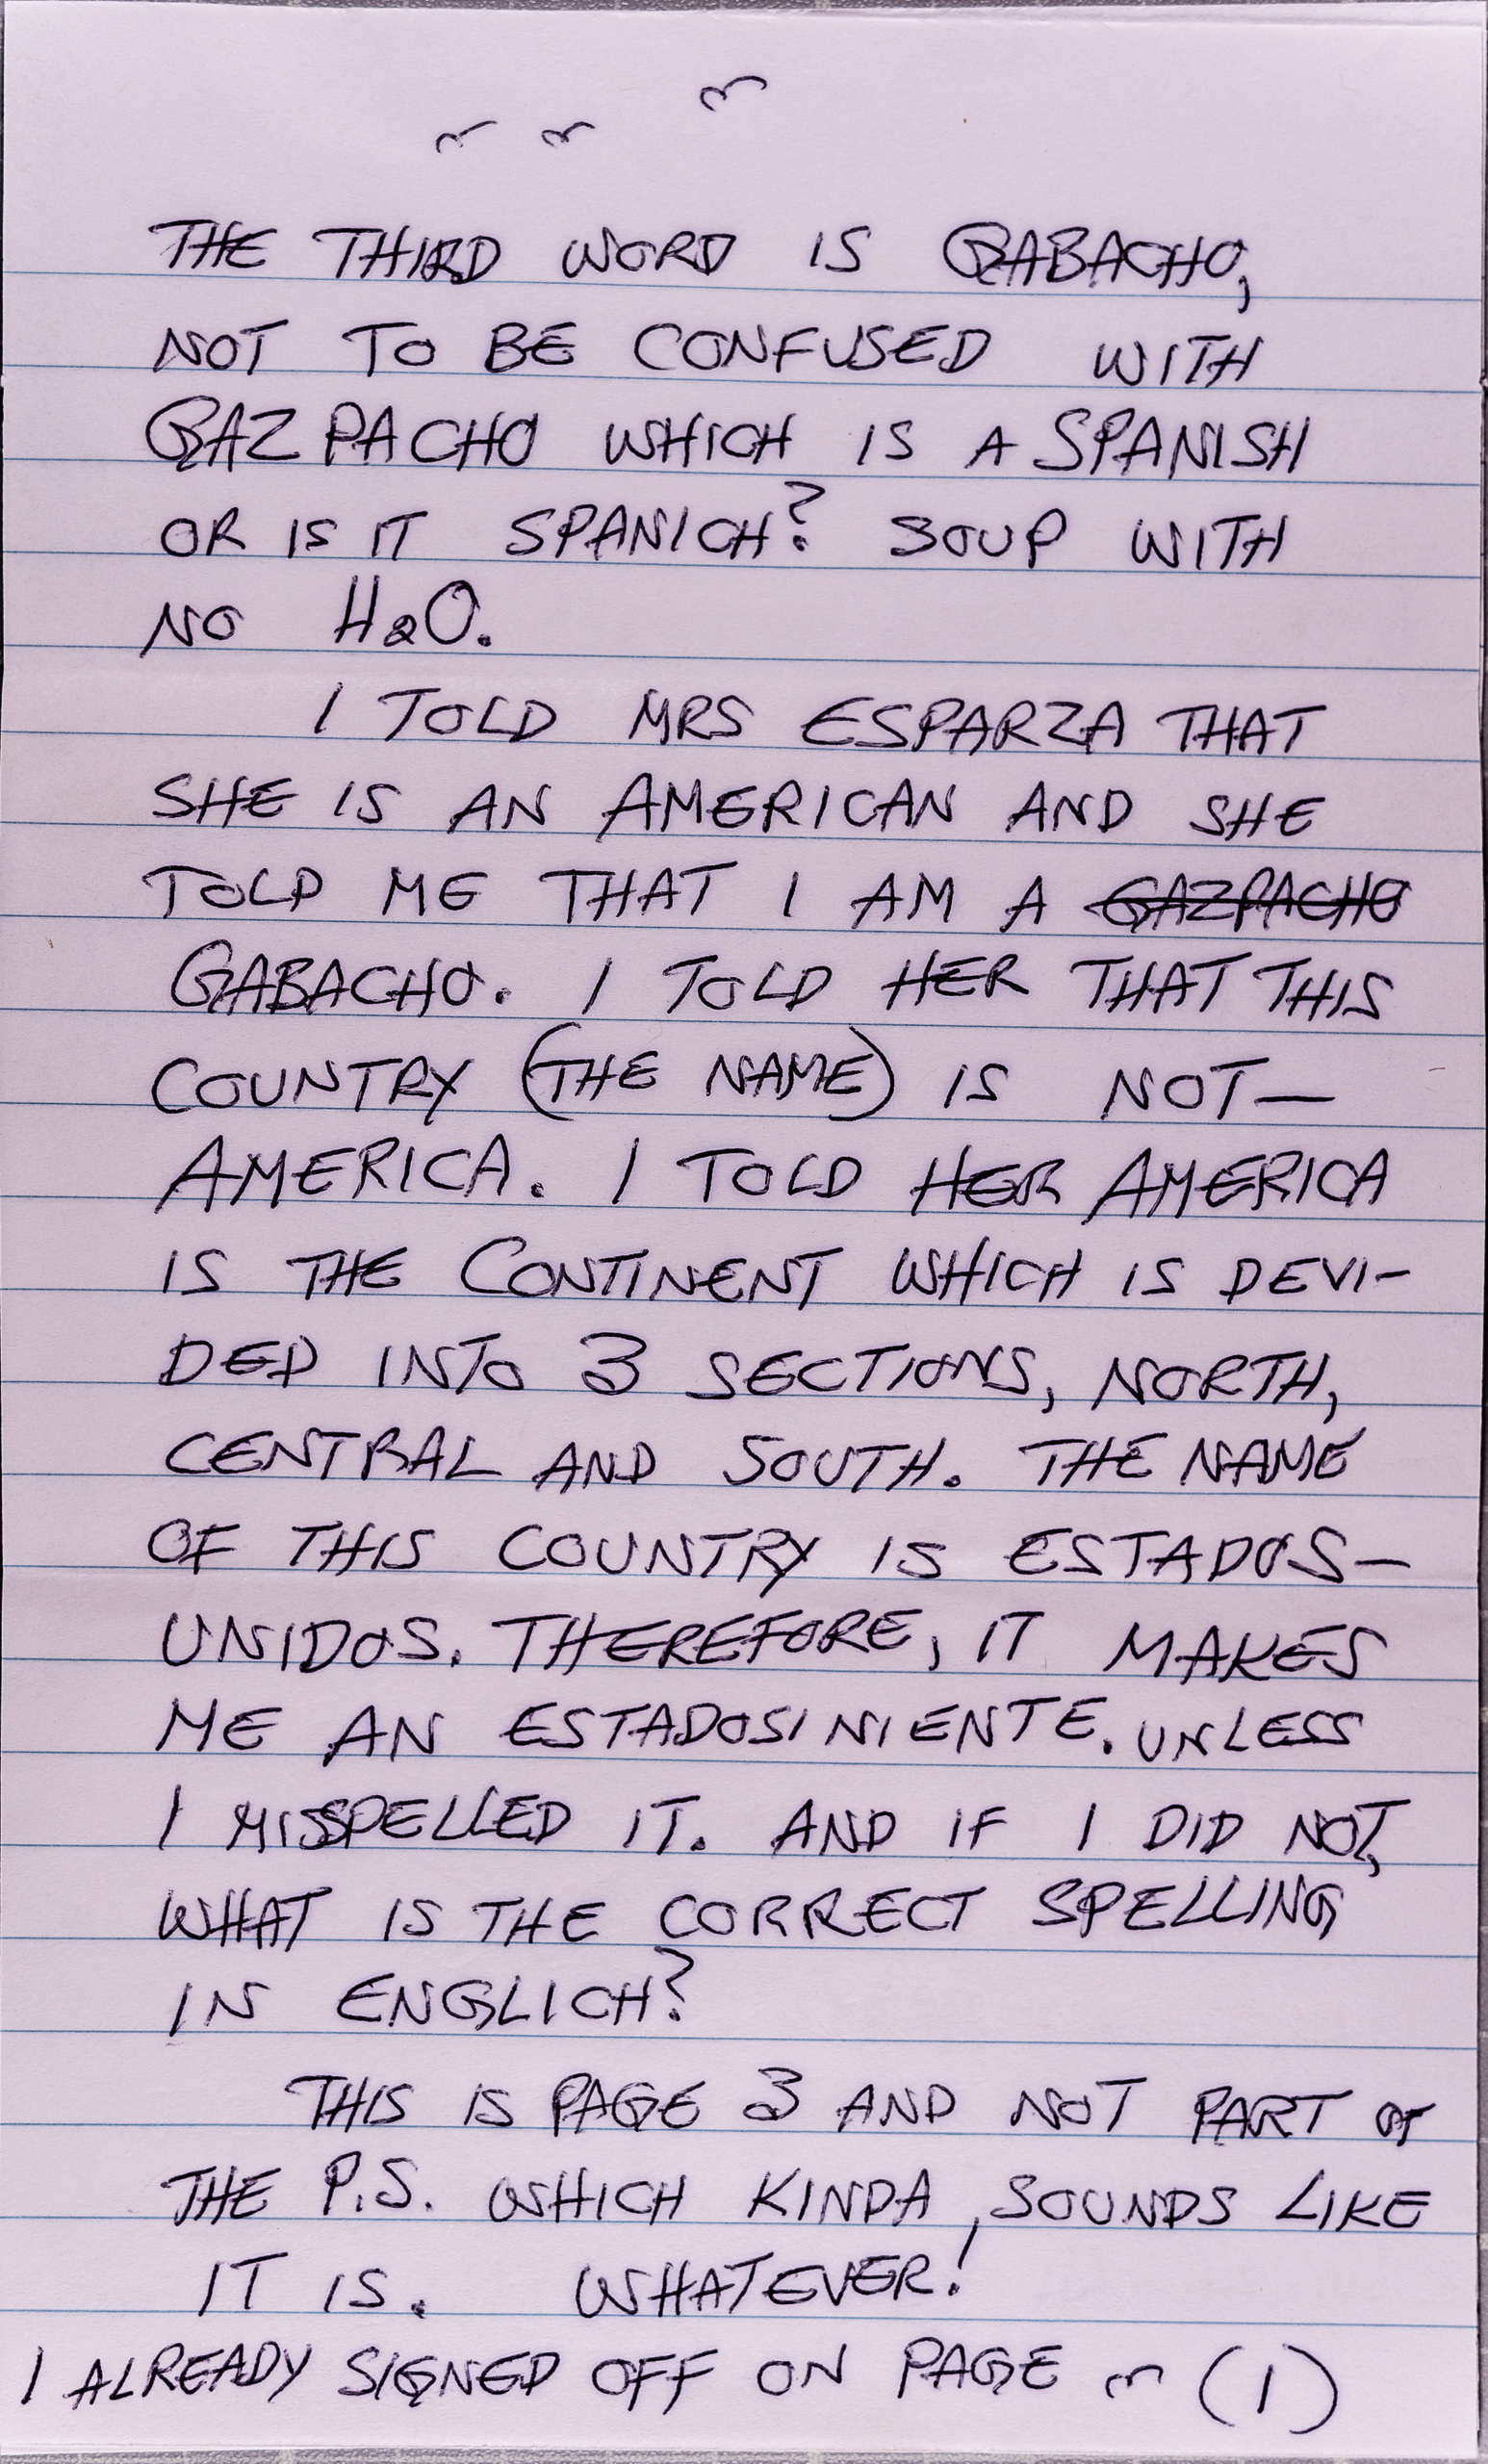 photo of a letter from Abe Perez (Reno, Nevada) to Cecilia P. Zucman (Monterey Park, CA) postmarked 13 July 2000.